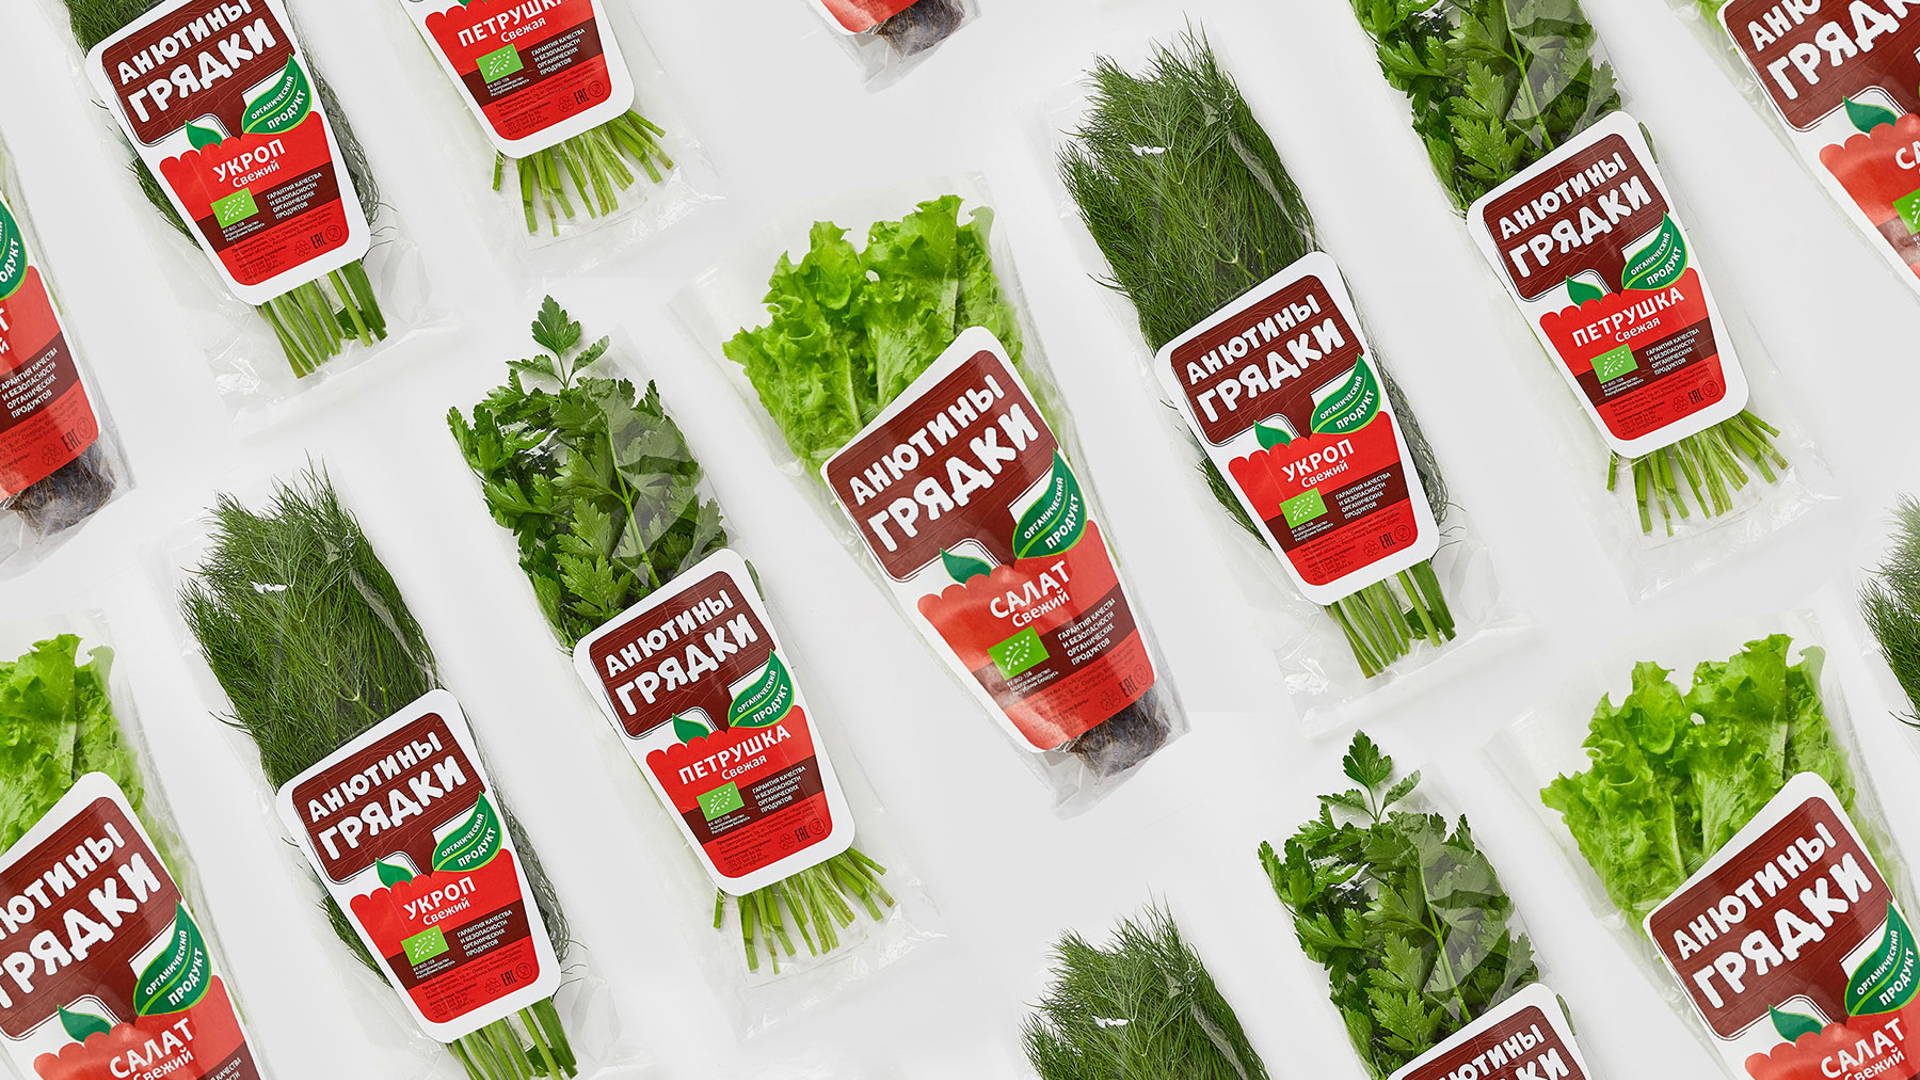 Featured image for Check Out This Friendly Packaging For a Belarusian Produce Brand